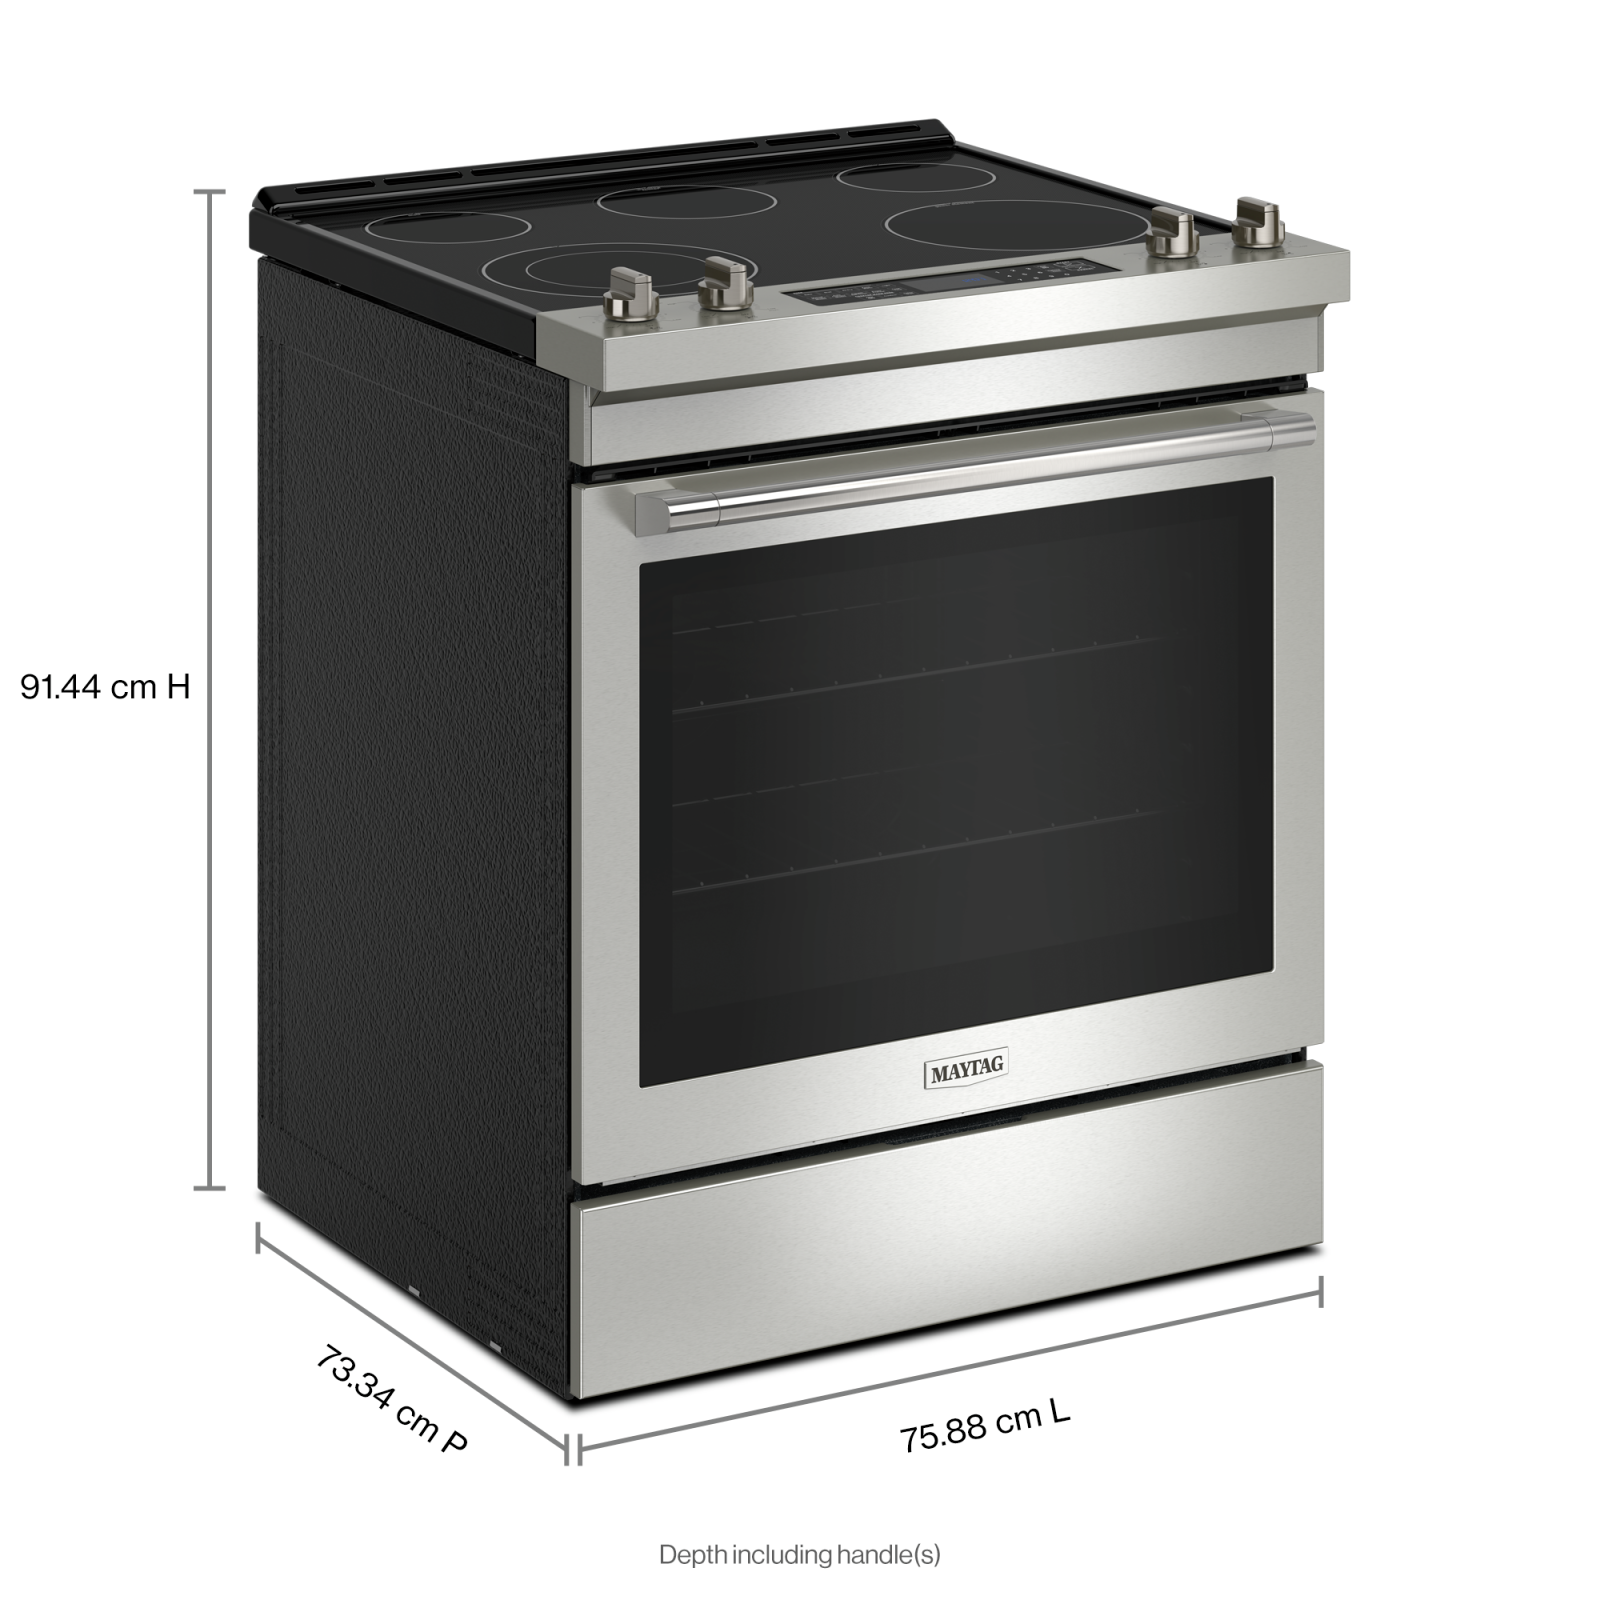 Maytag - 6.4 cu. ft  Electric Range in Stainless - YMES8800PZ